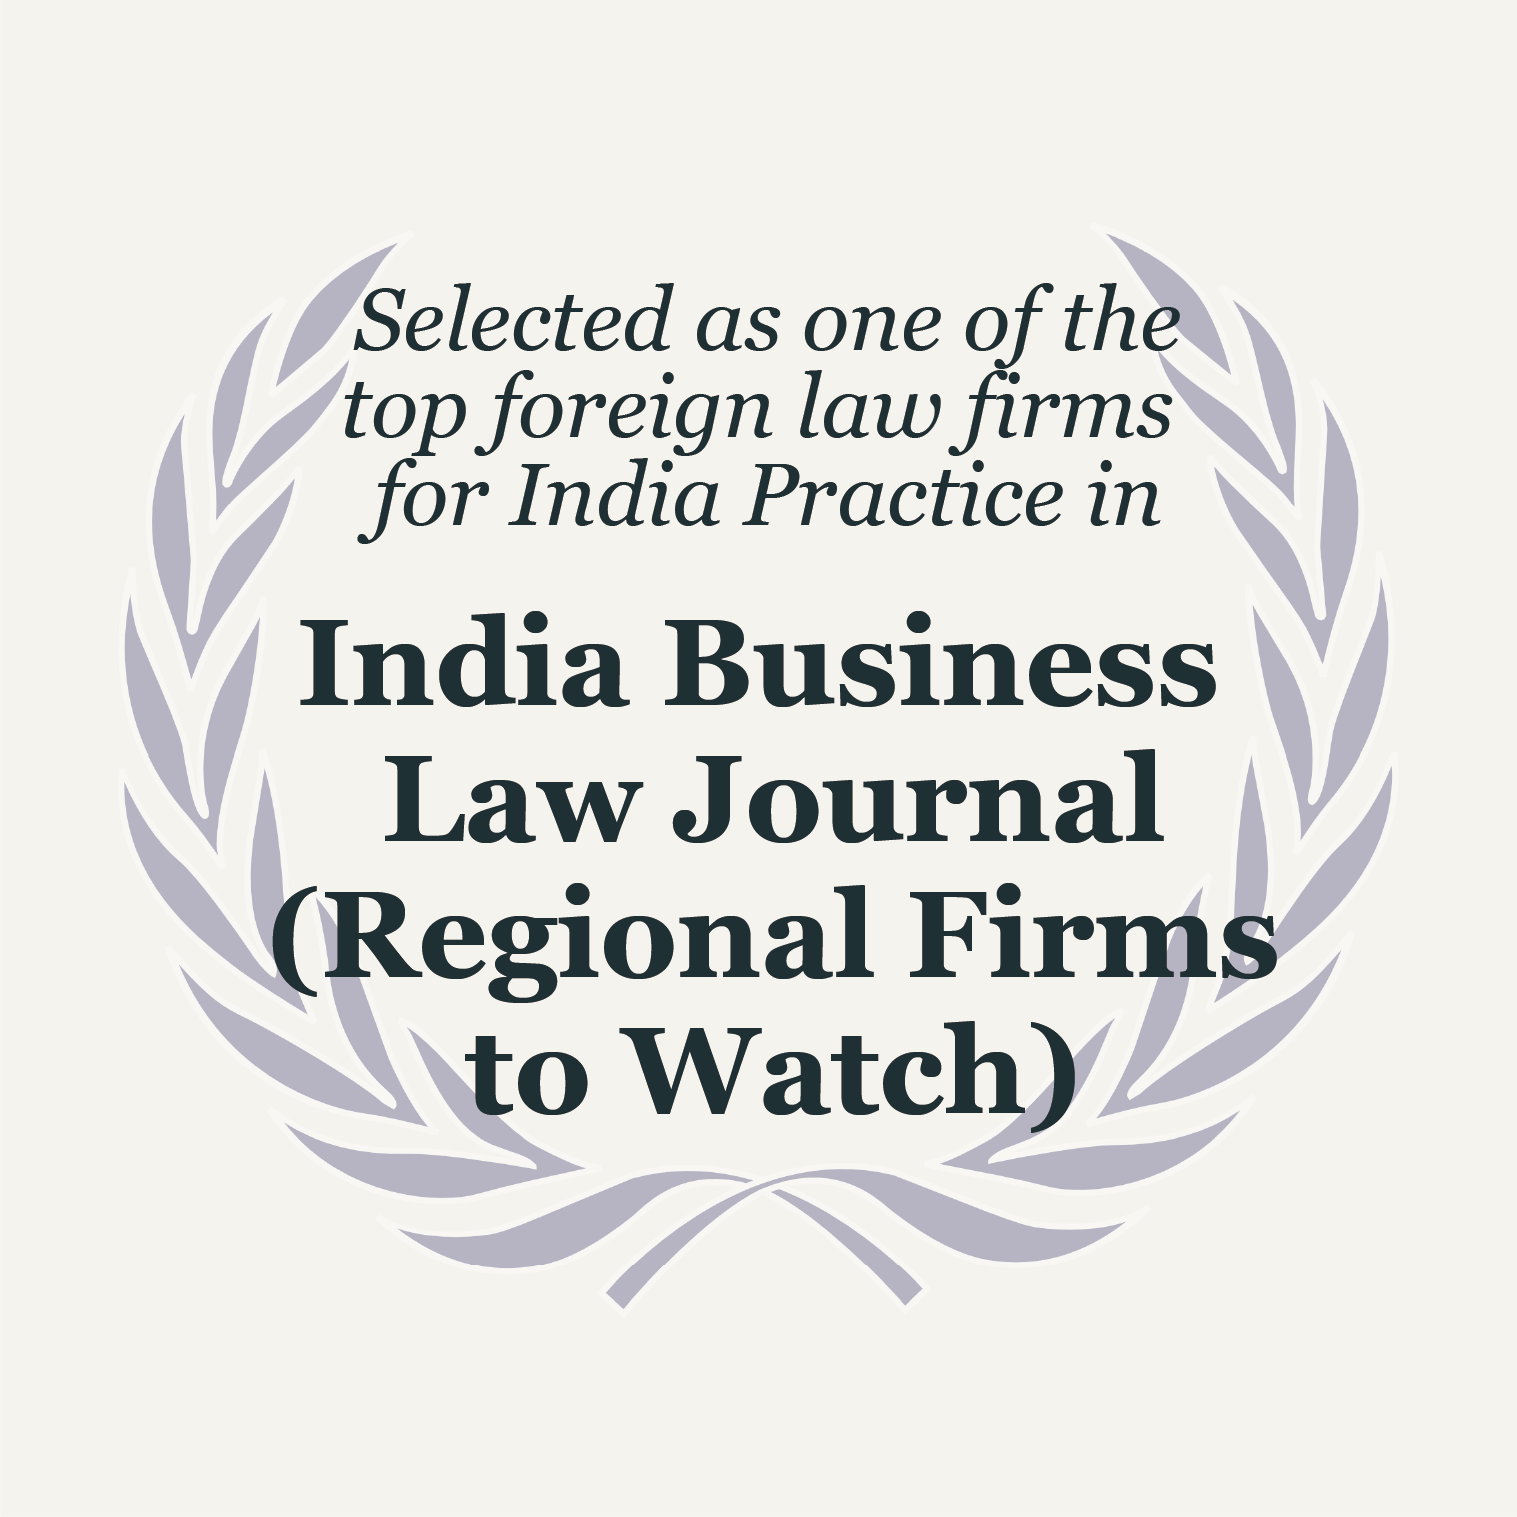 Atsumi & Sakai was recognized in a report published by India Business Law Journal